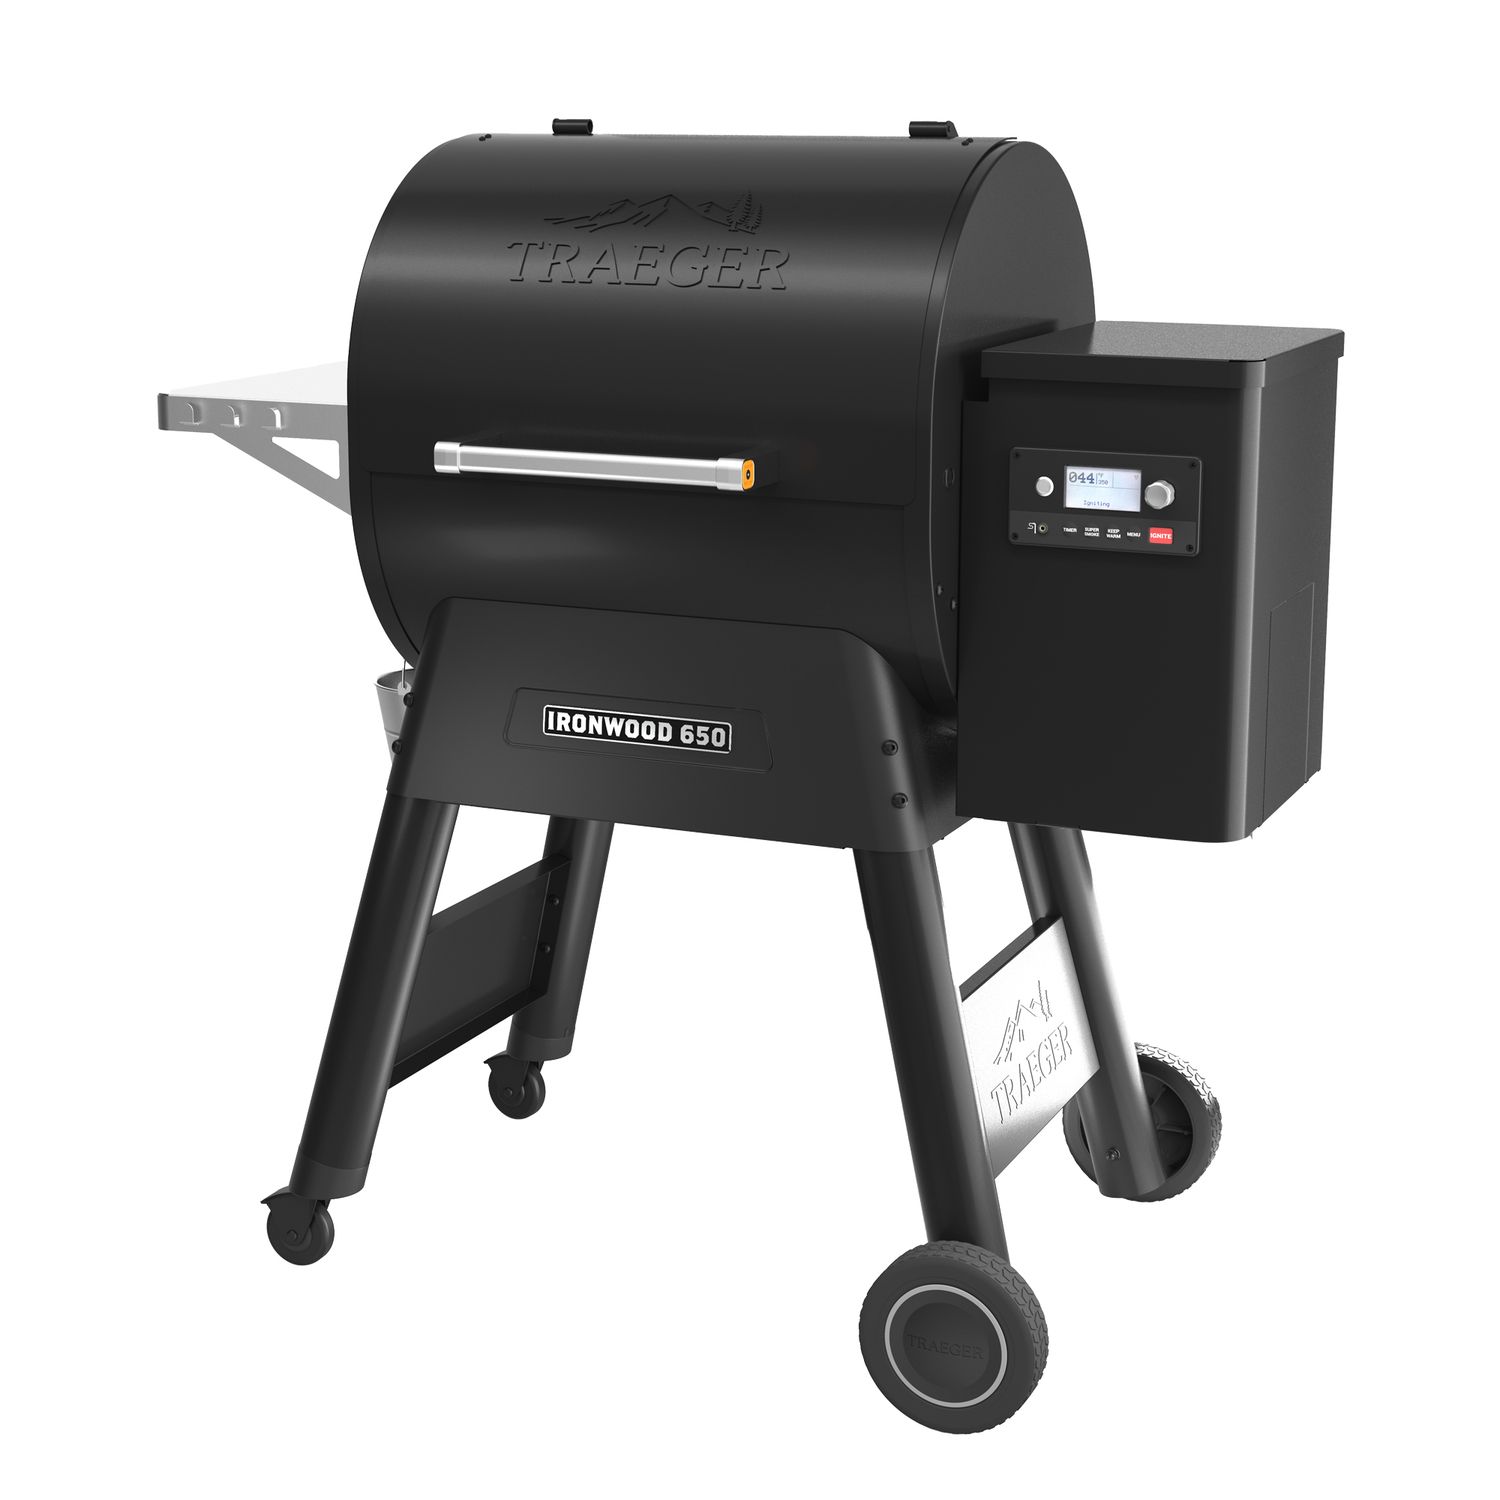 Traeger Ironwood 650 Wood Pellet Smoker Grill Review